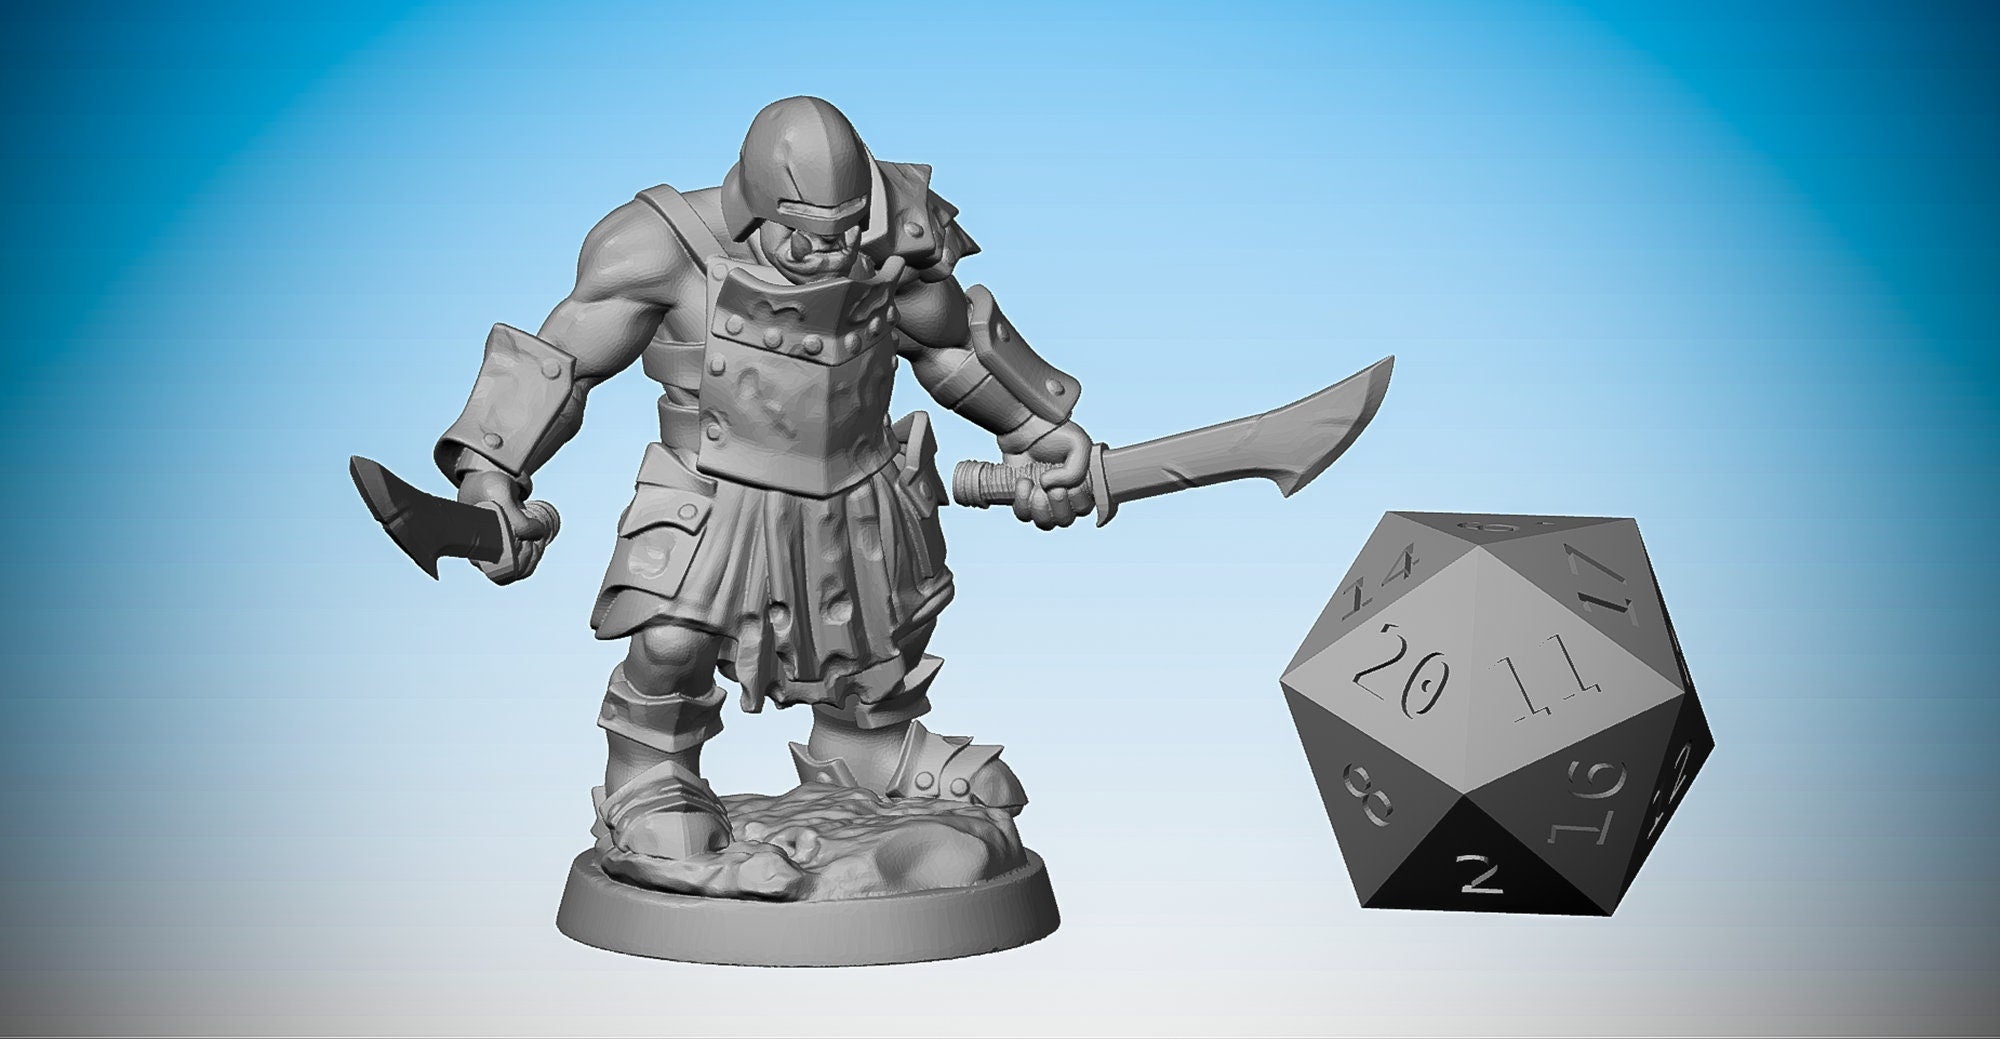 ORK Uruk-hai "Dual Sword Ripper" | Dungeons and Dragons | DnD | Pathfinder | Tabletop | RPG | Hero Size | 28 mm-Role Playing Miniatures